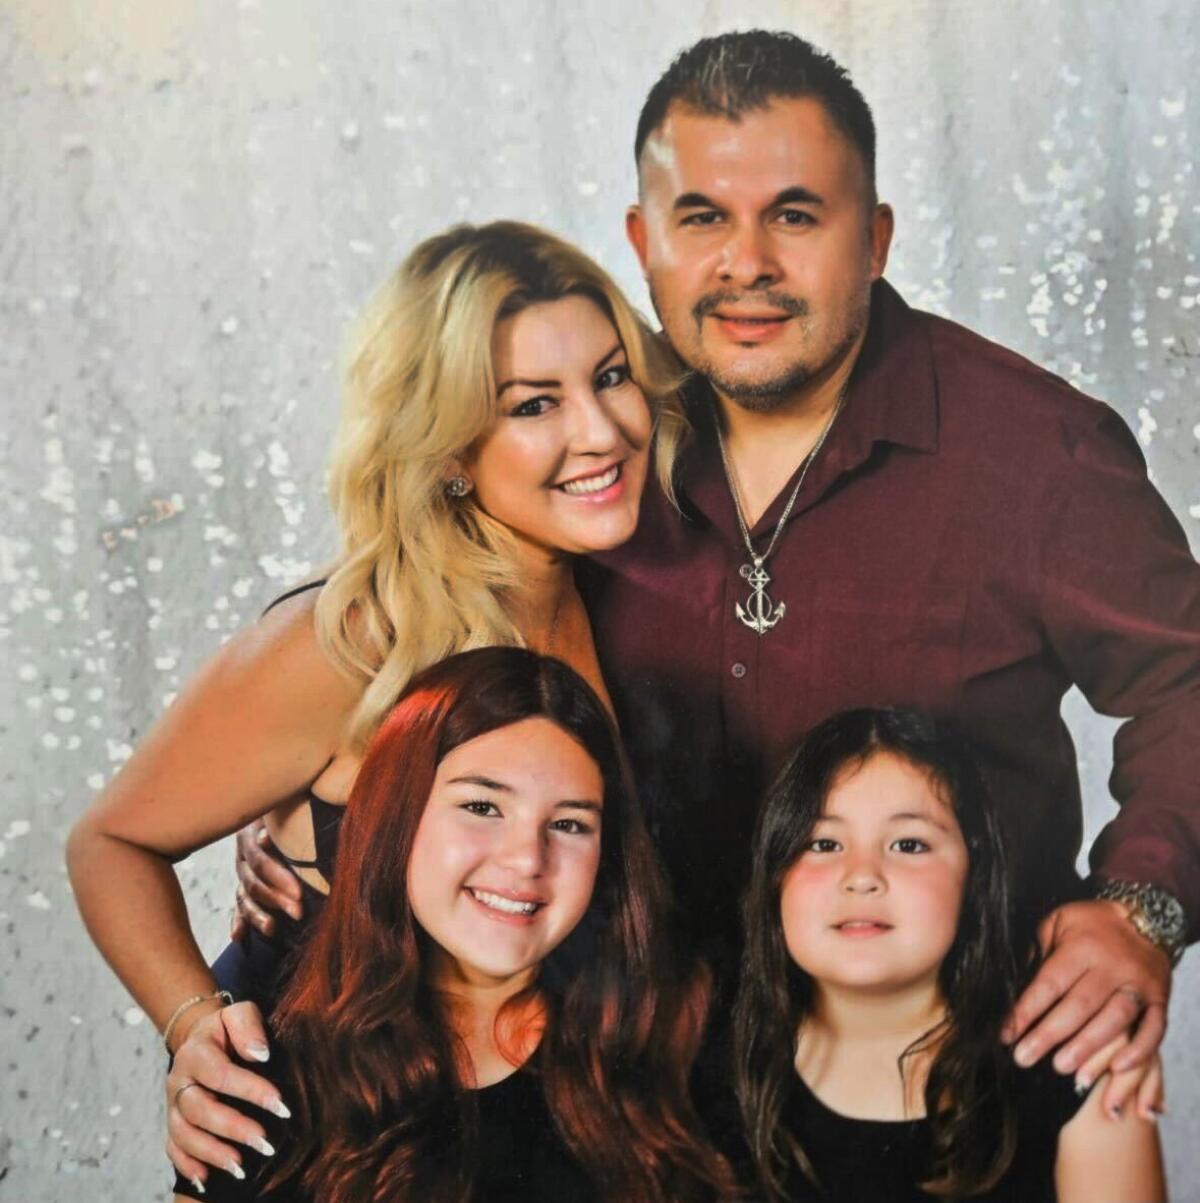 Deputy Arturo Atilano Valadez, who died by suicide in November, and his family.